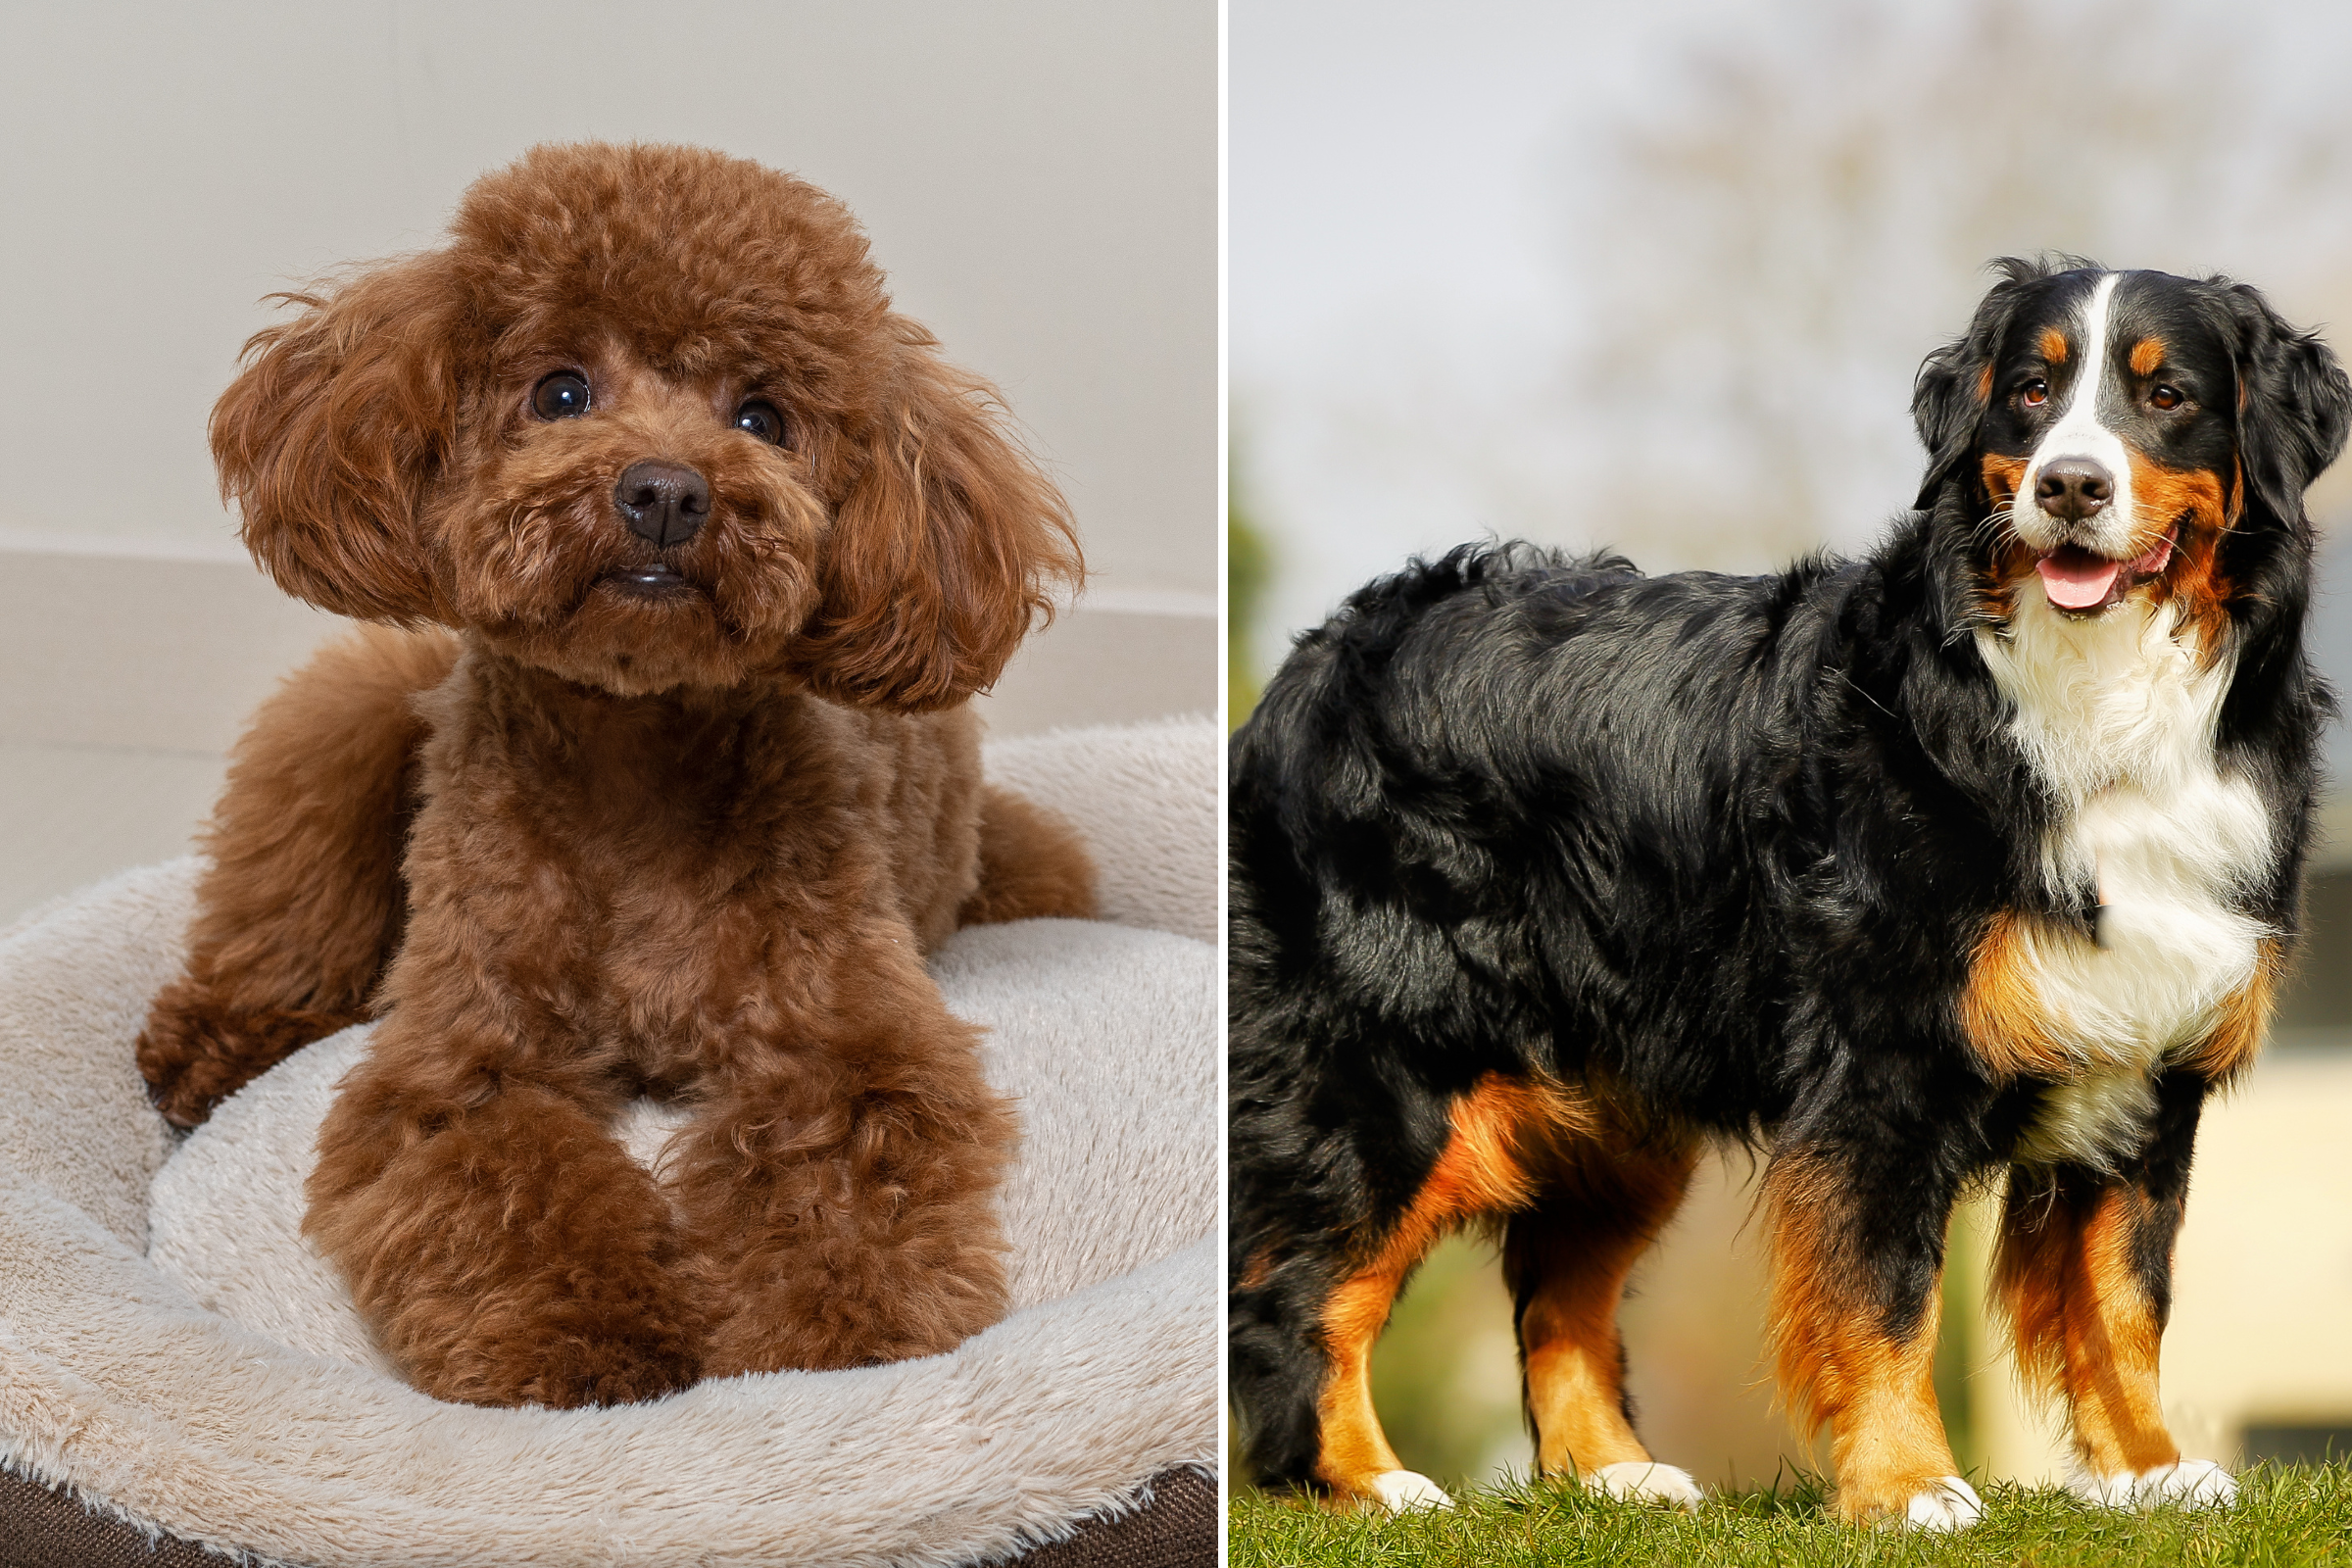 Dogs And Beautiful Tiny Girls Porn - Owner Reveals What a Bernese Mountain Dog and Toy Poodle Cross Looks Like